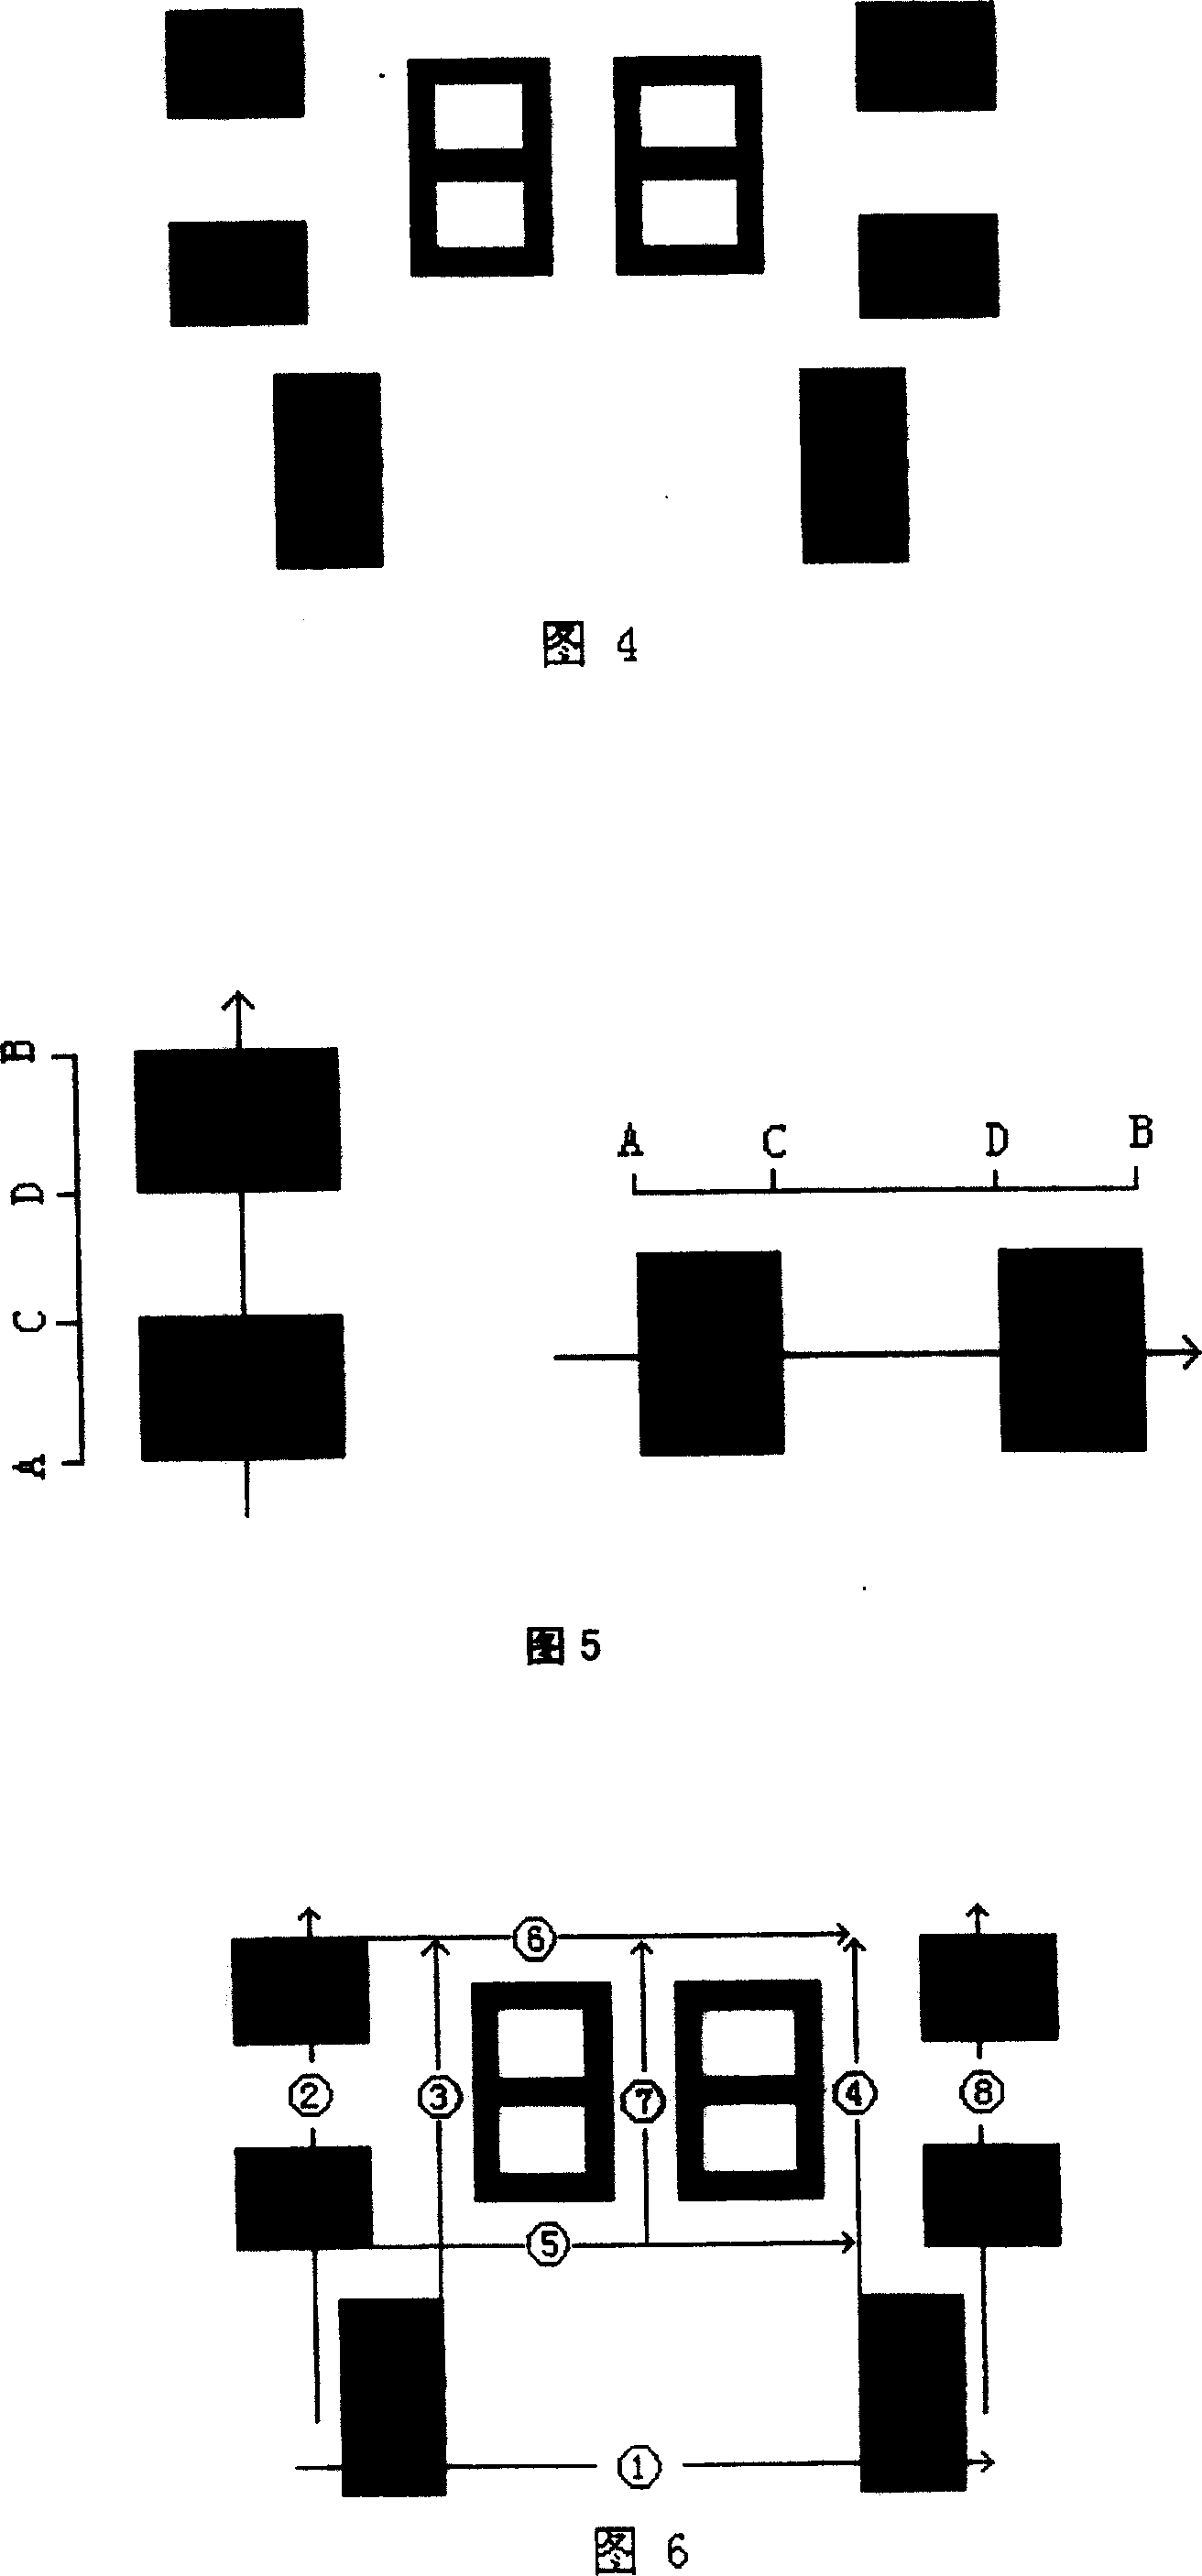 Method for visual guiding by manual road sign